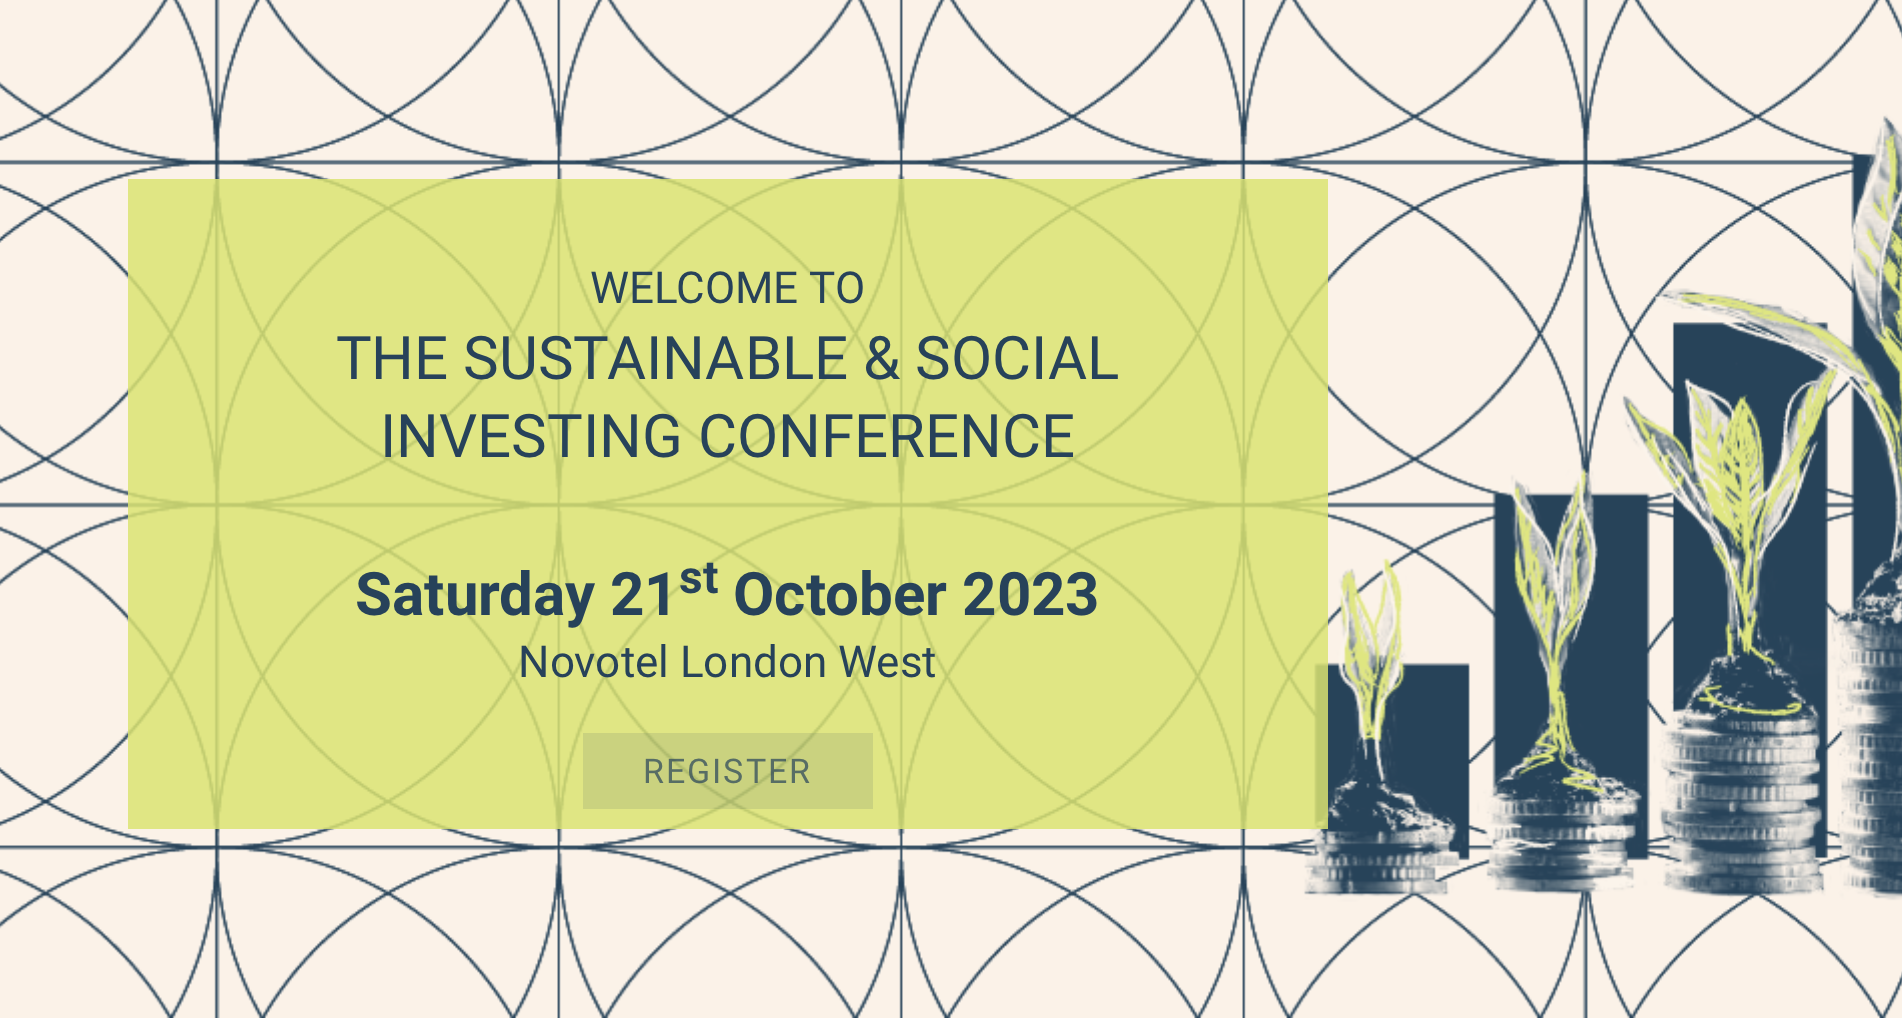 THE SUSTAINABLE & SOCIAL INVESTING CONFERENCE